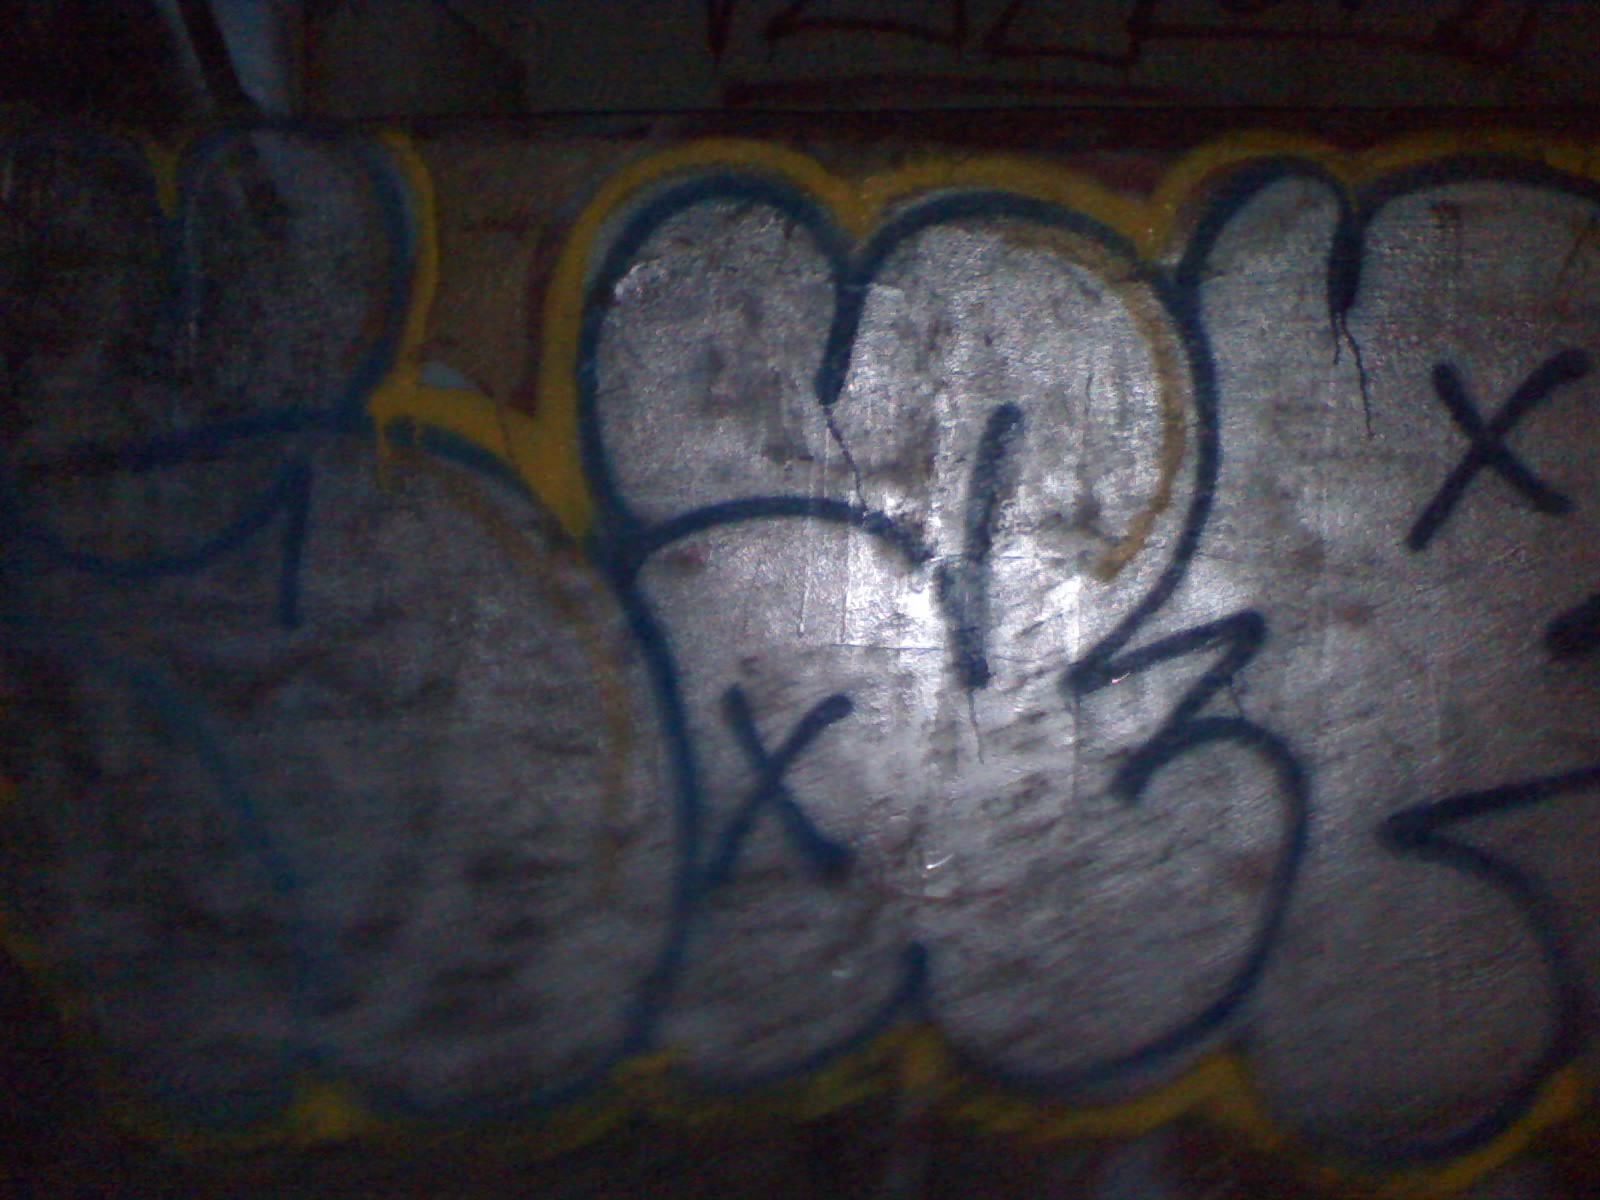 Some tags